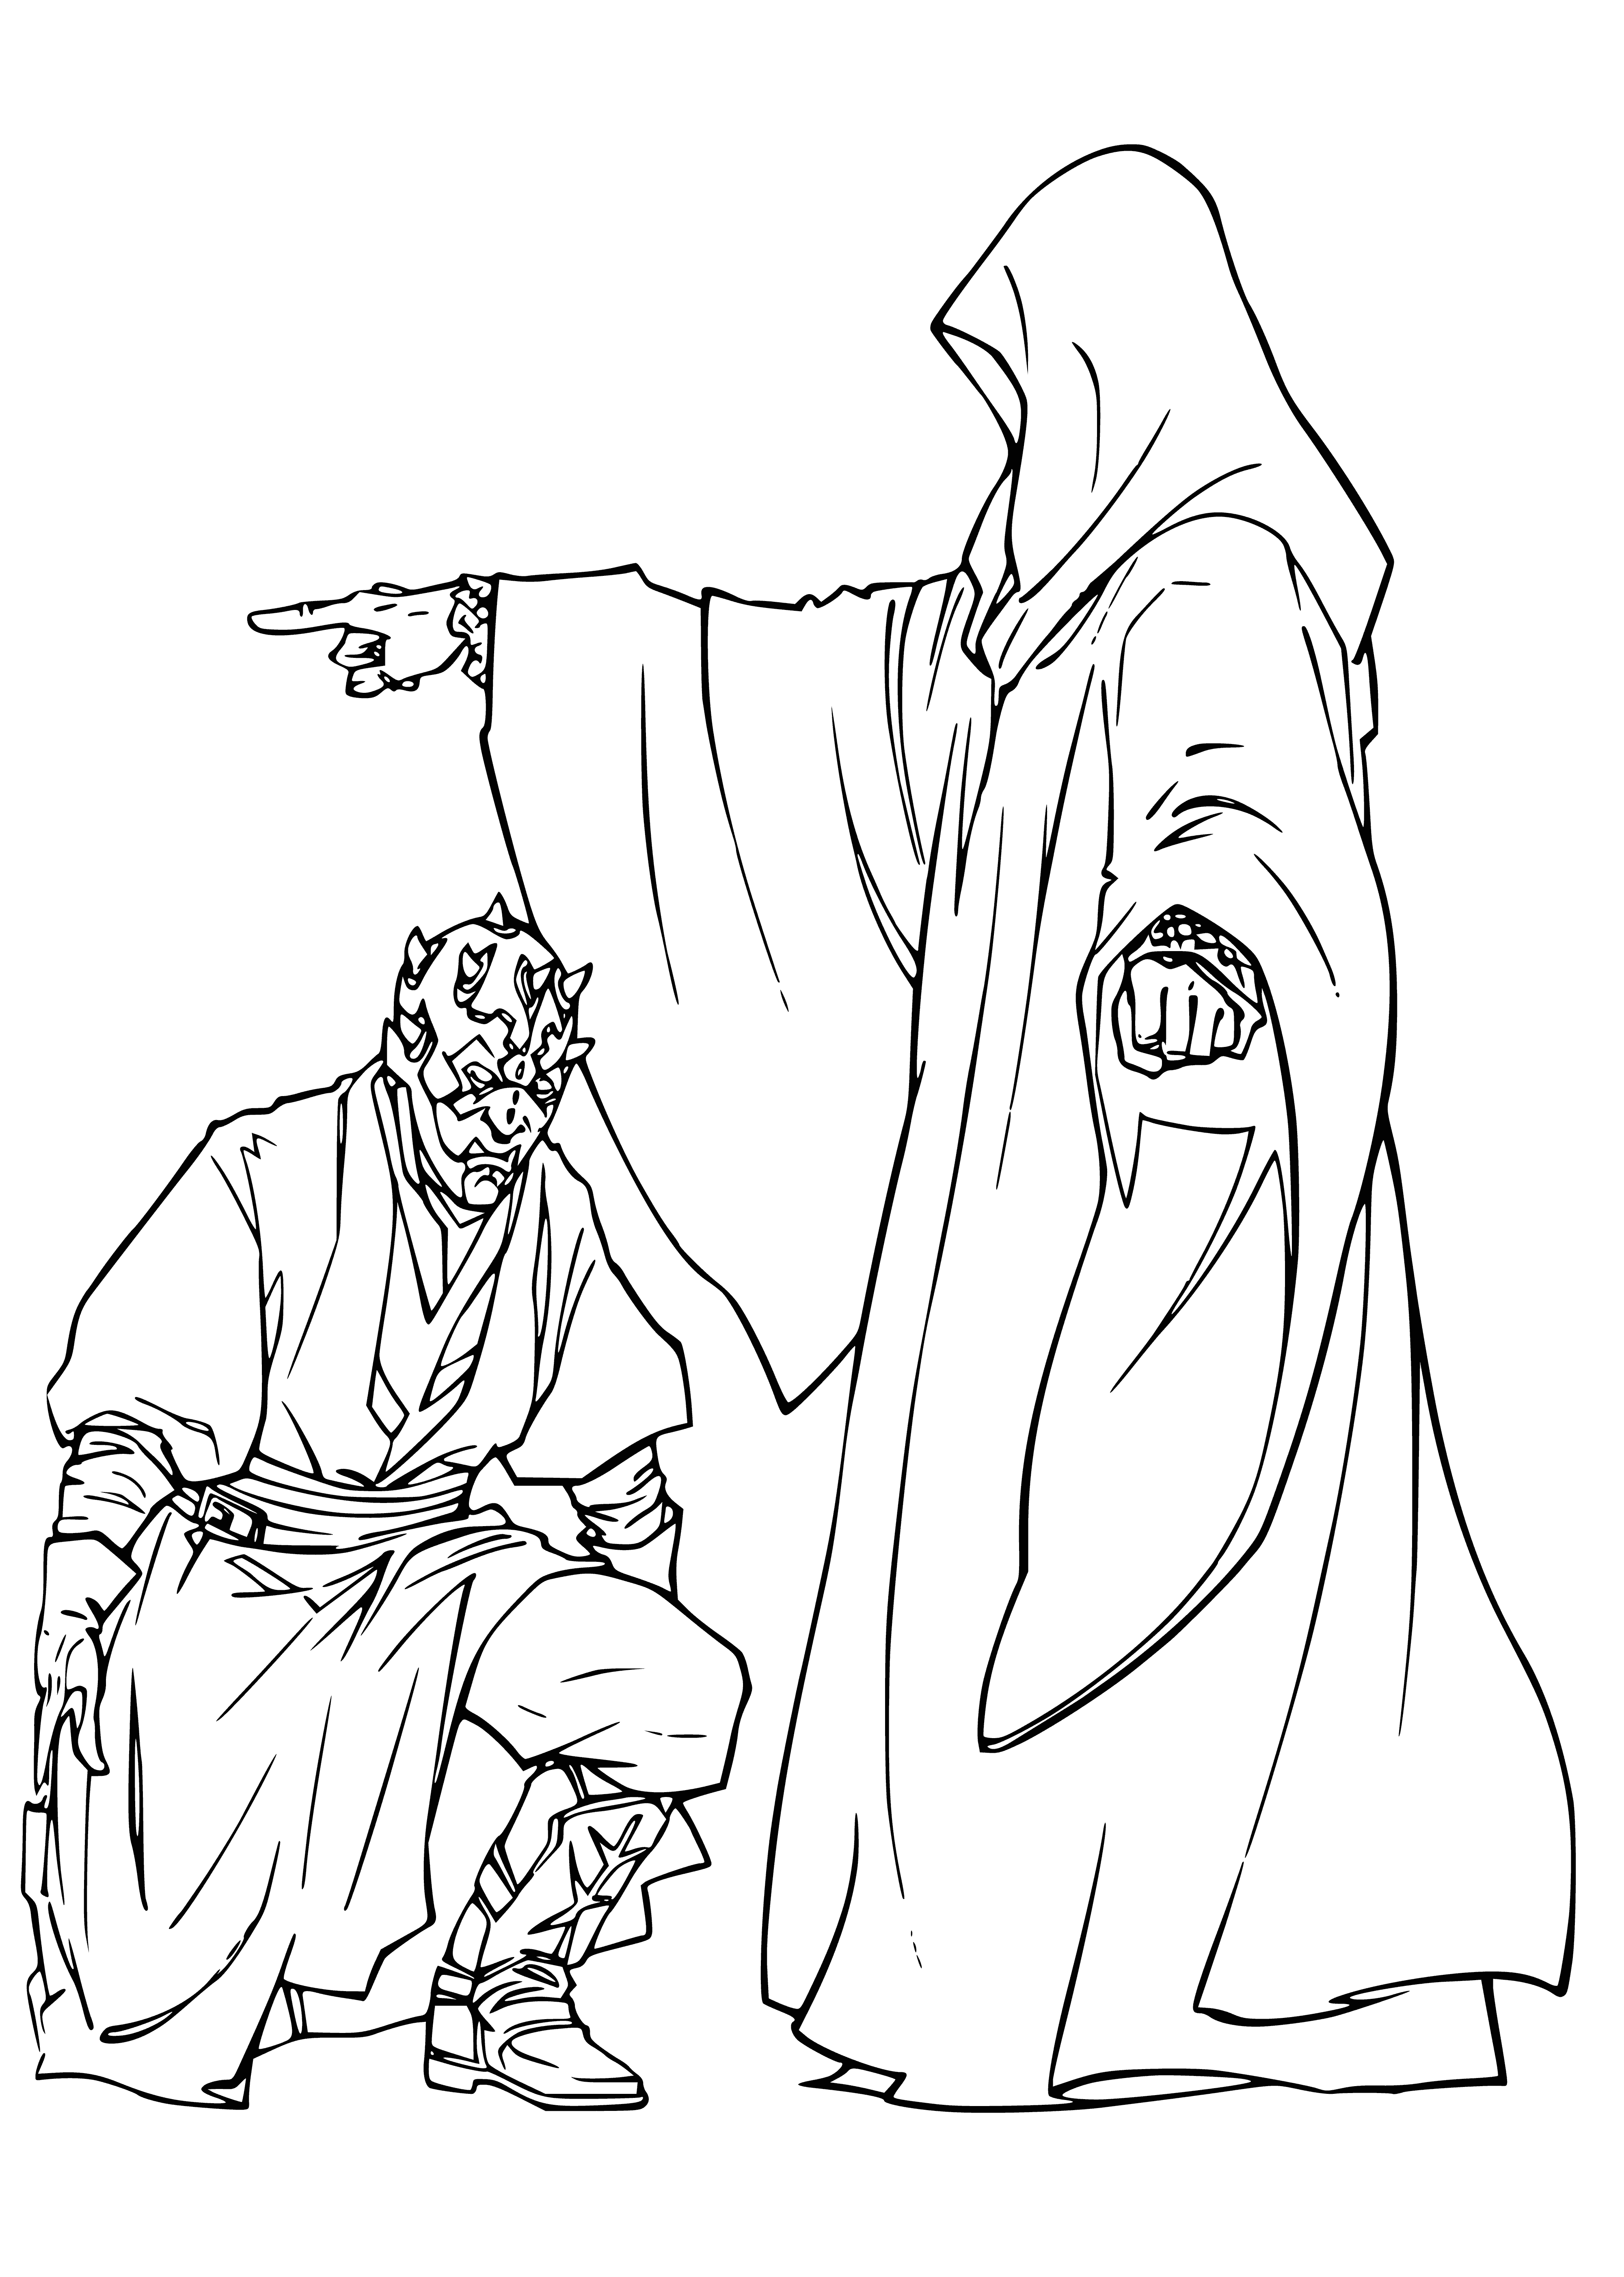 coloring page: Man in black cape fights a brown-robed man in space; one with red lightsaber, one with blue. #StarWars #ColoringPage